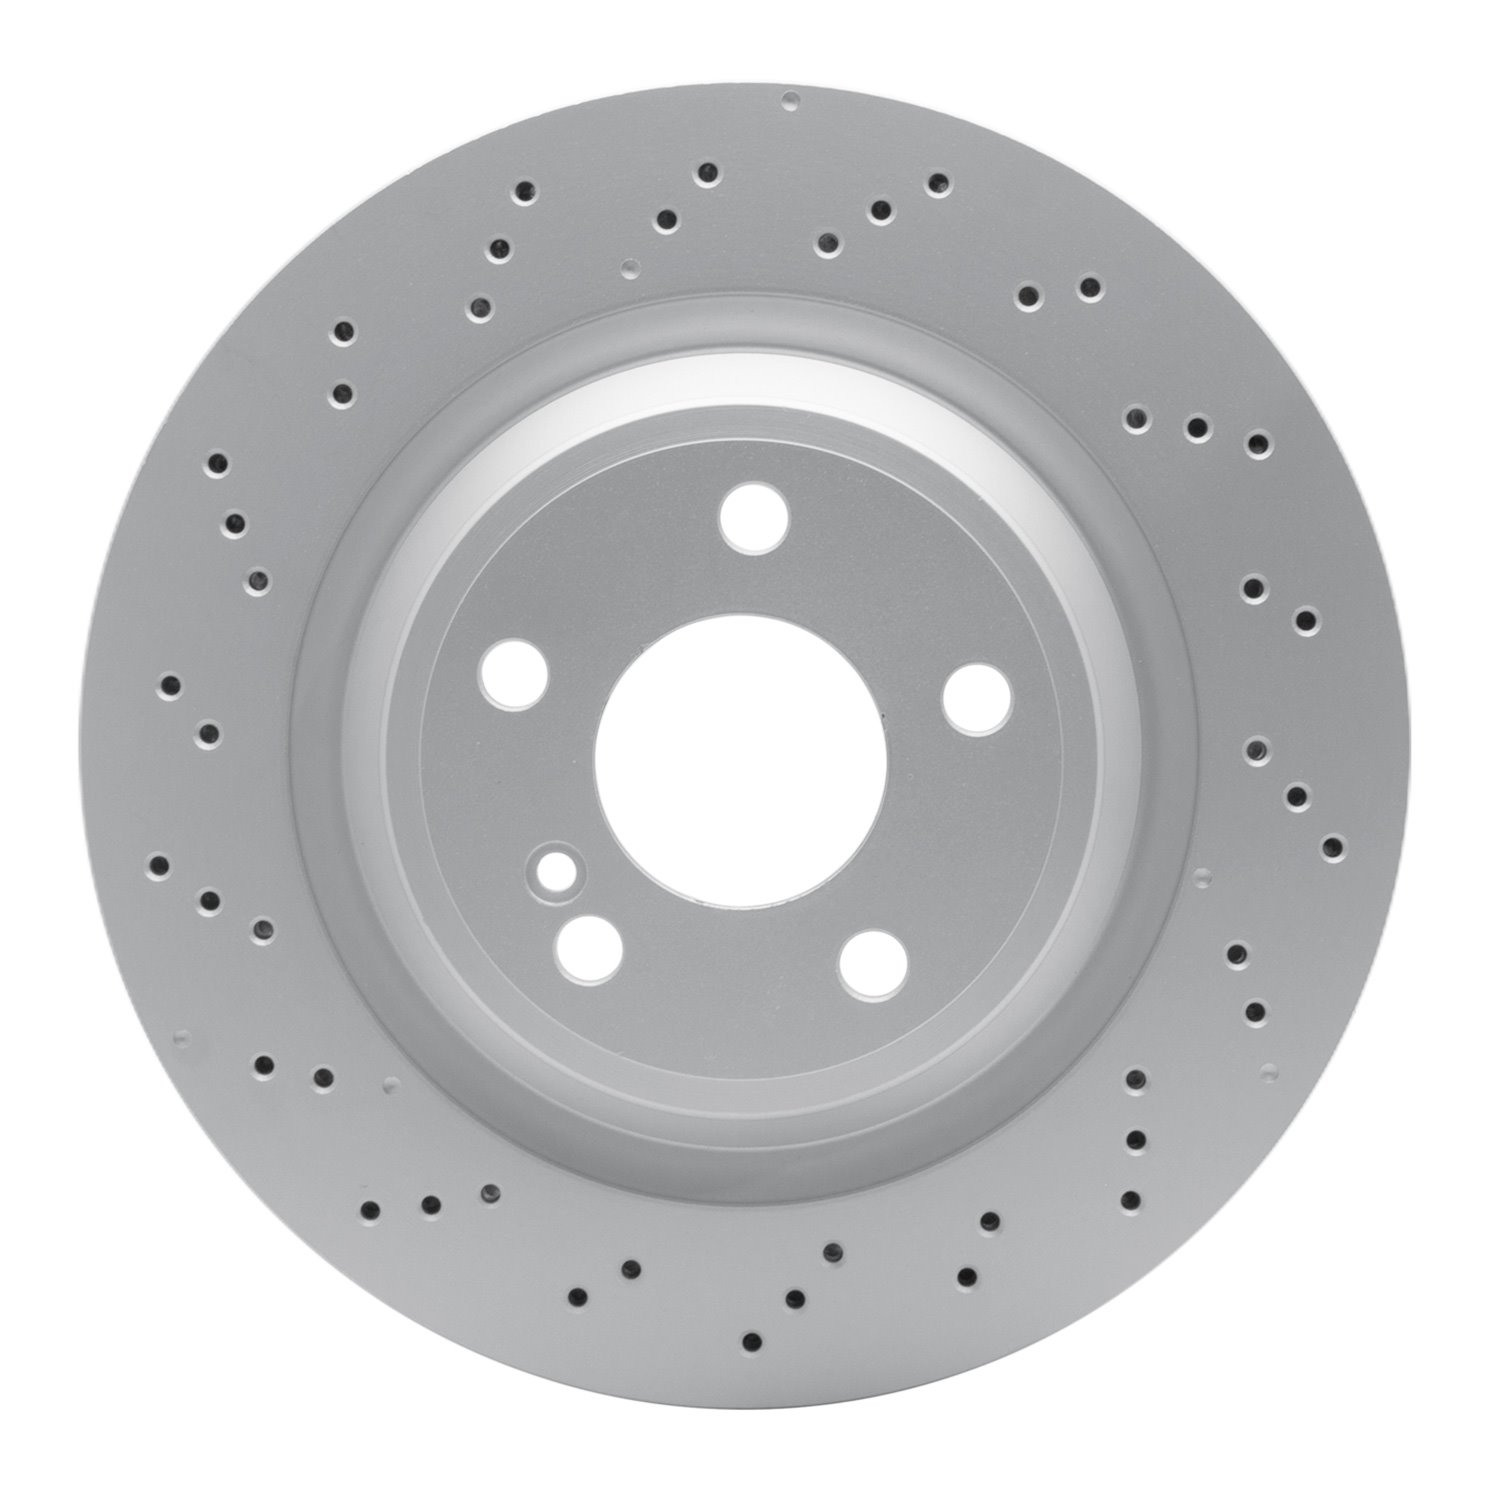 Hi-Carbon Alloy Geomet-Coated Drilled Rotor, 2013-2020 Mercedes-Benz, Position: Rear